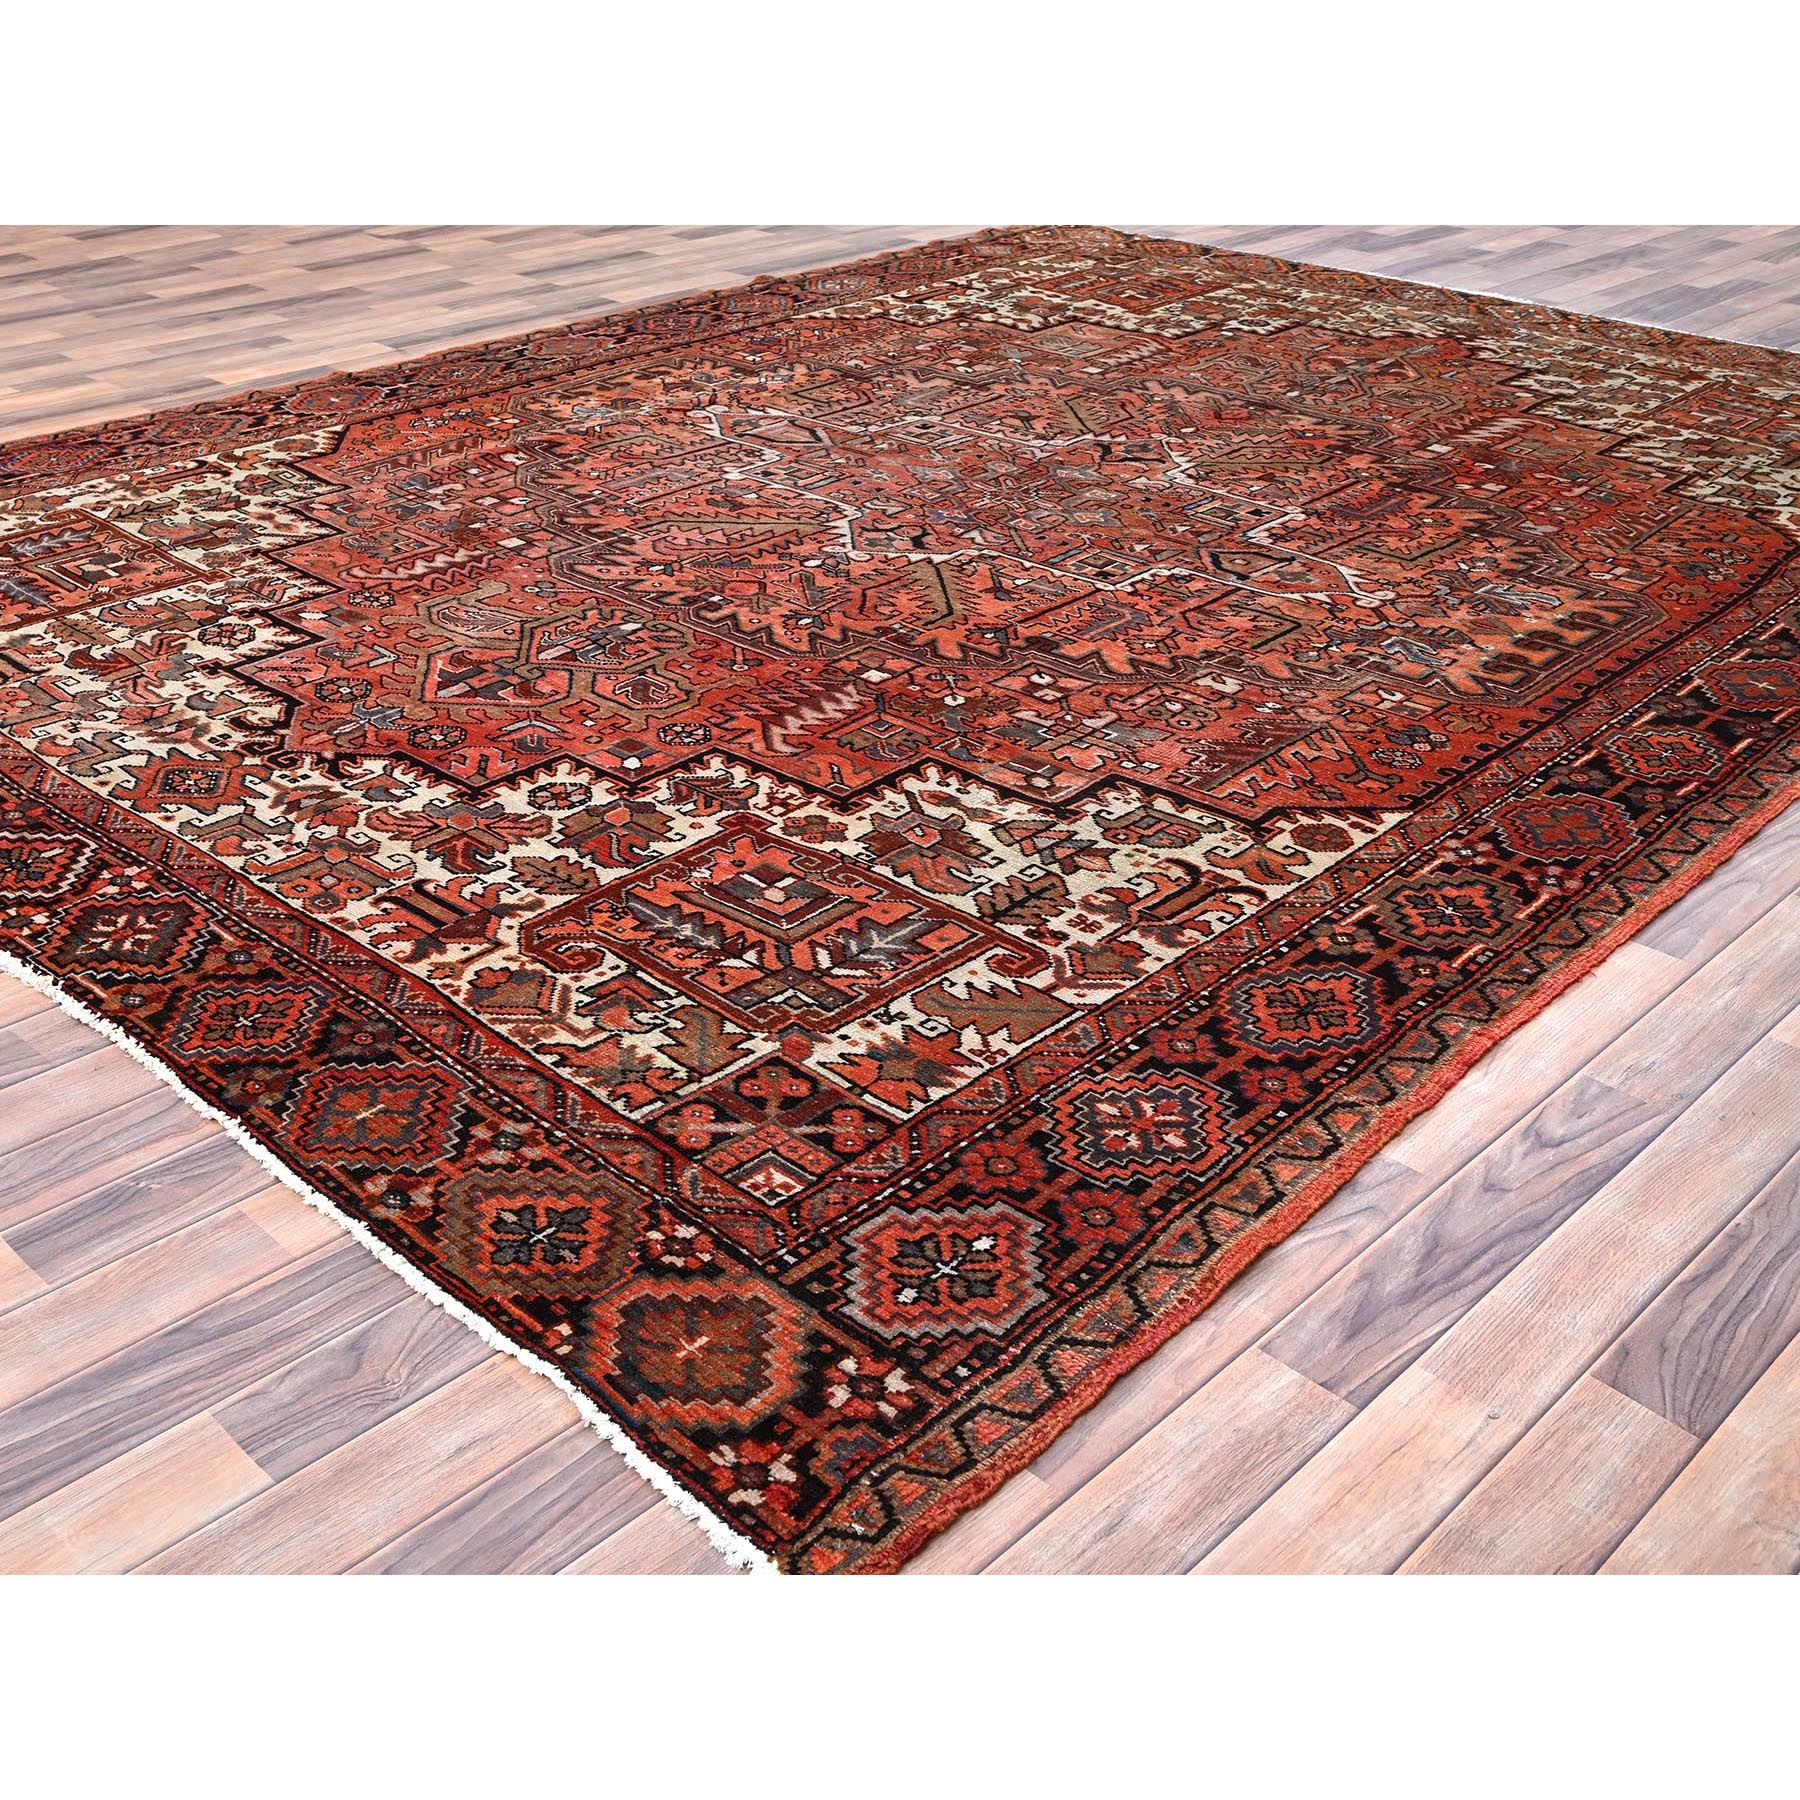 9'3"x12'2" Prismatic Red, Vintage Persian Heriz with Tribal Ambience, Good Condition, Distressed Look, Pure Wool, Hand Woven, Oriental Rug 